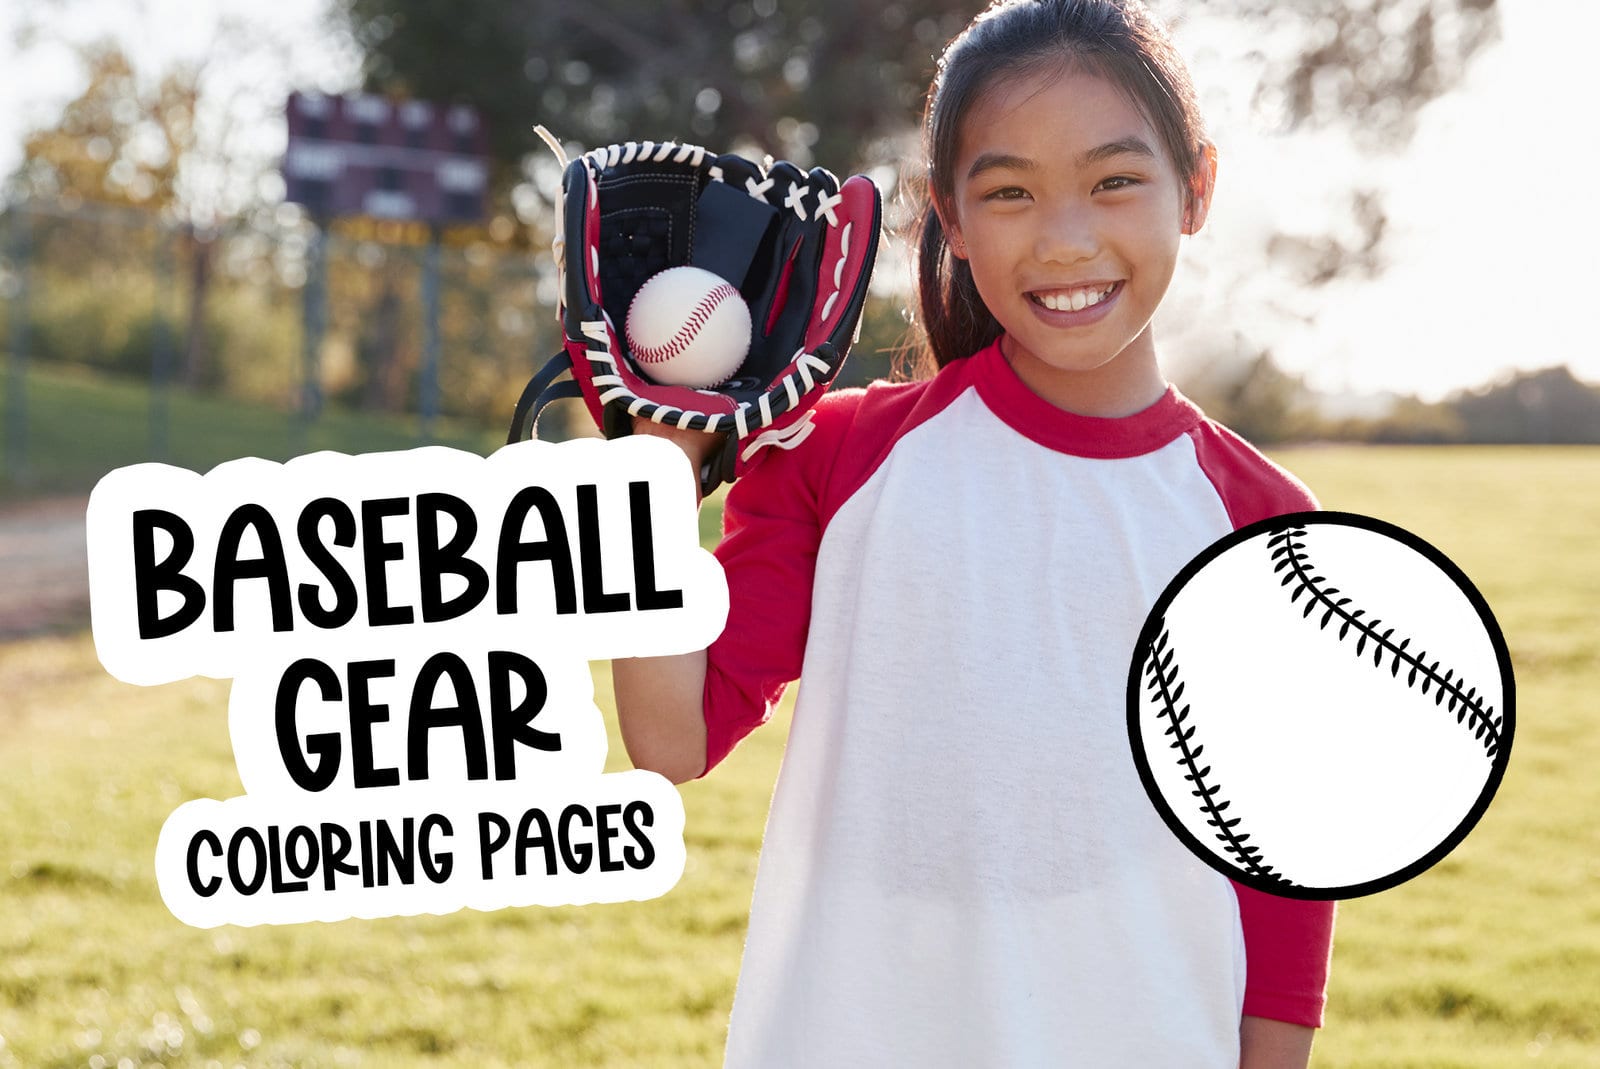 Baseball gear coloring pages